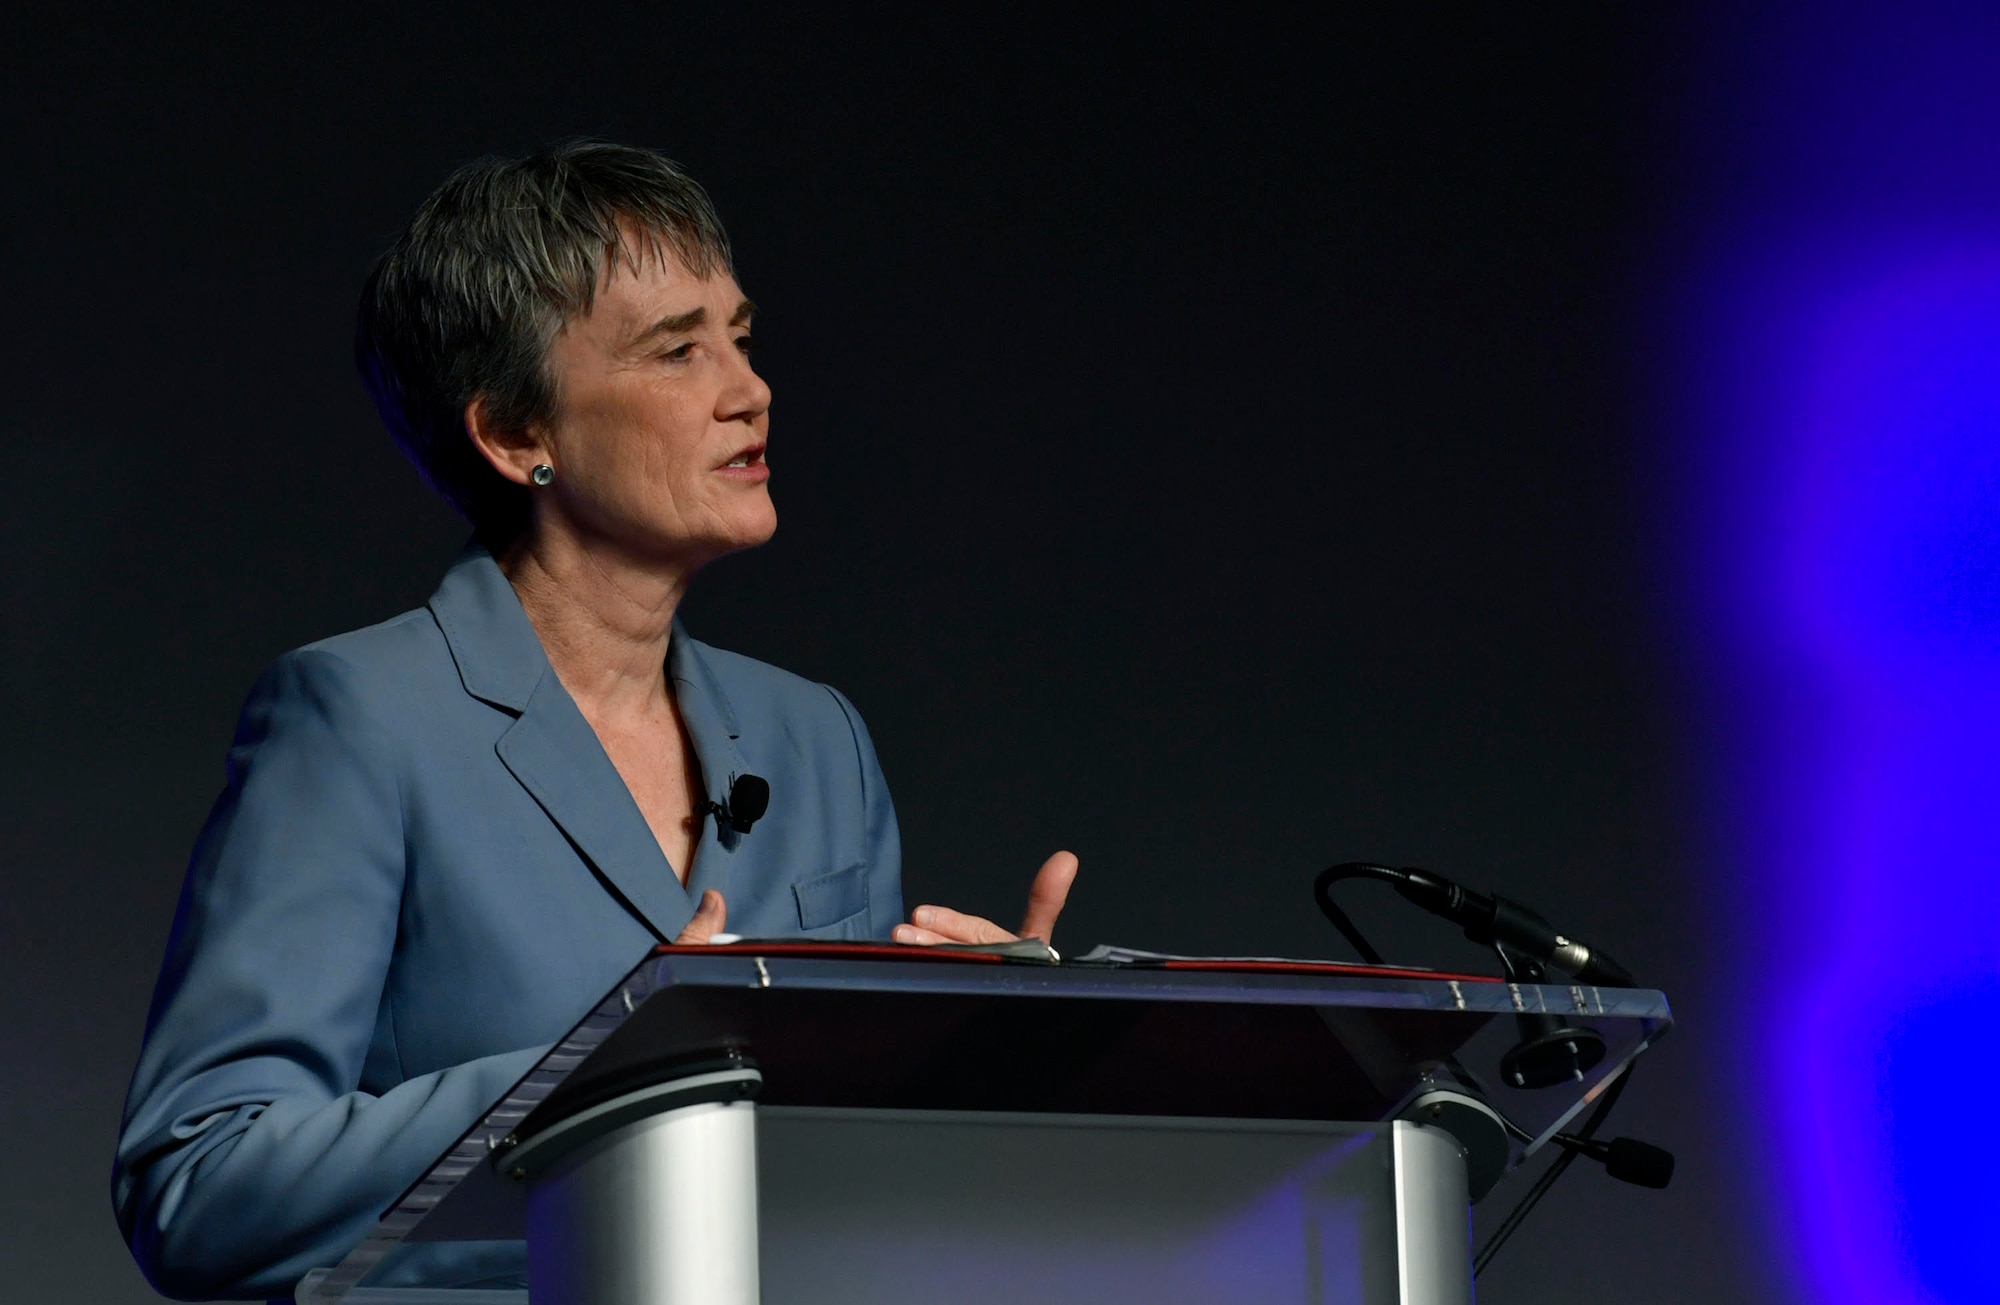 Secretary of the Air Force Heather Wilson speaks about innovation during the Air Force Association Innovation: The Warfighter’s Edge conference in Orlando, Fla., Feb. 22, 2018. (U.S. Air Force photo by Wayne A. Clark)